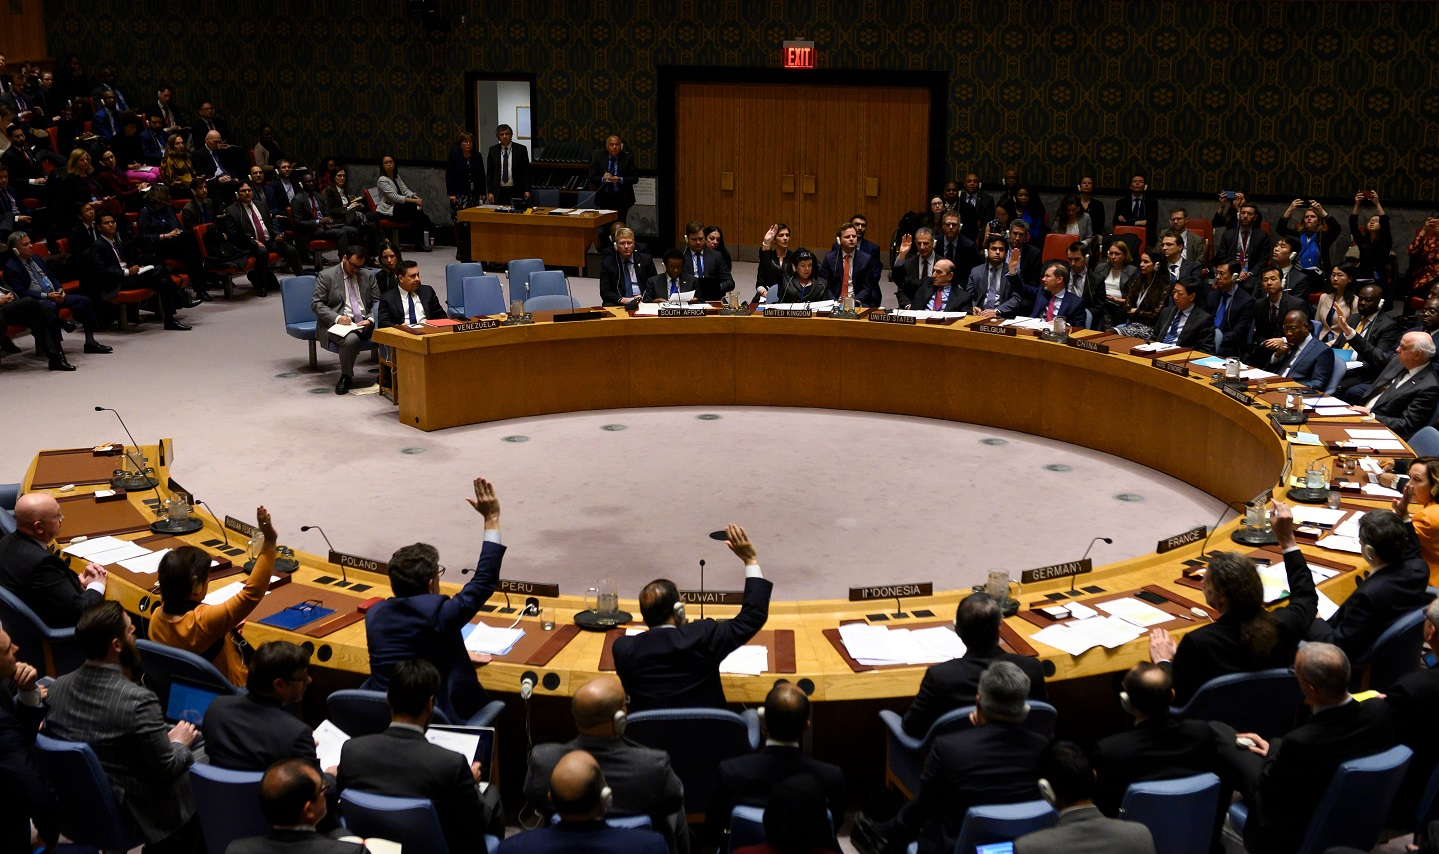 The members of the United Nations Security Council hold a meeting to vote for a resolutions on controlling the turmoil in Venezuela on February 28, 2019 at the United Nations in New York.